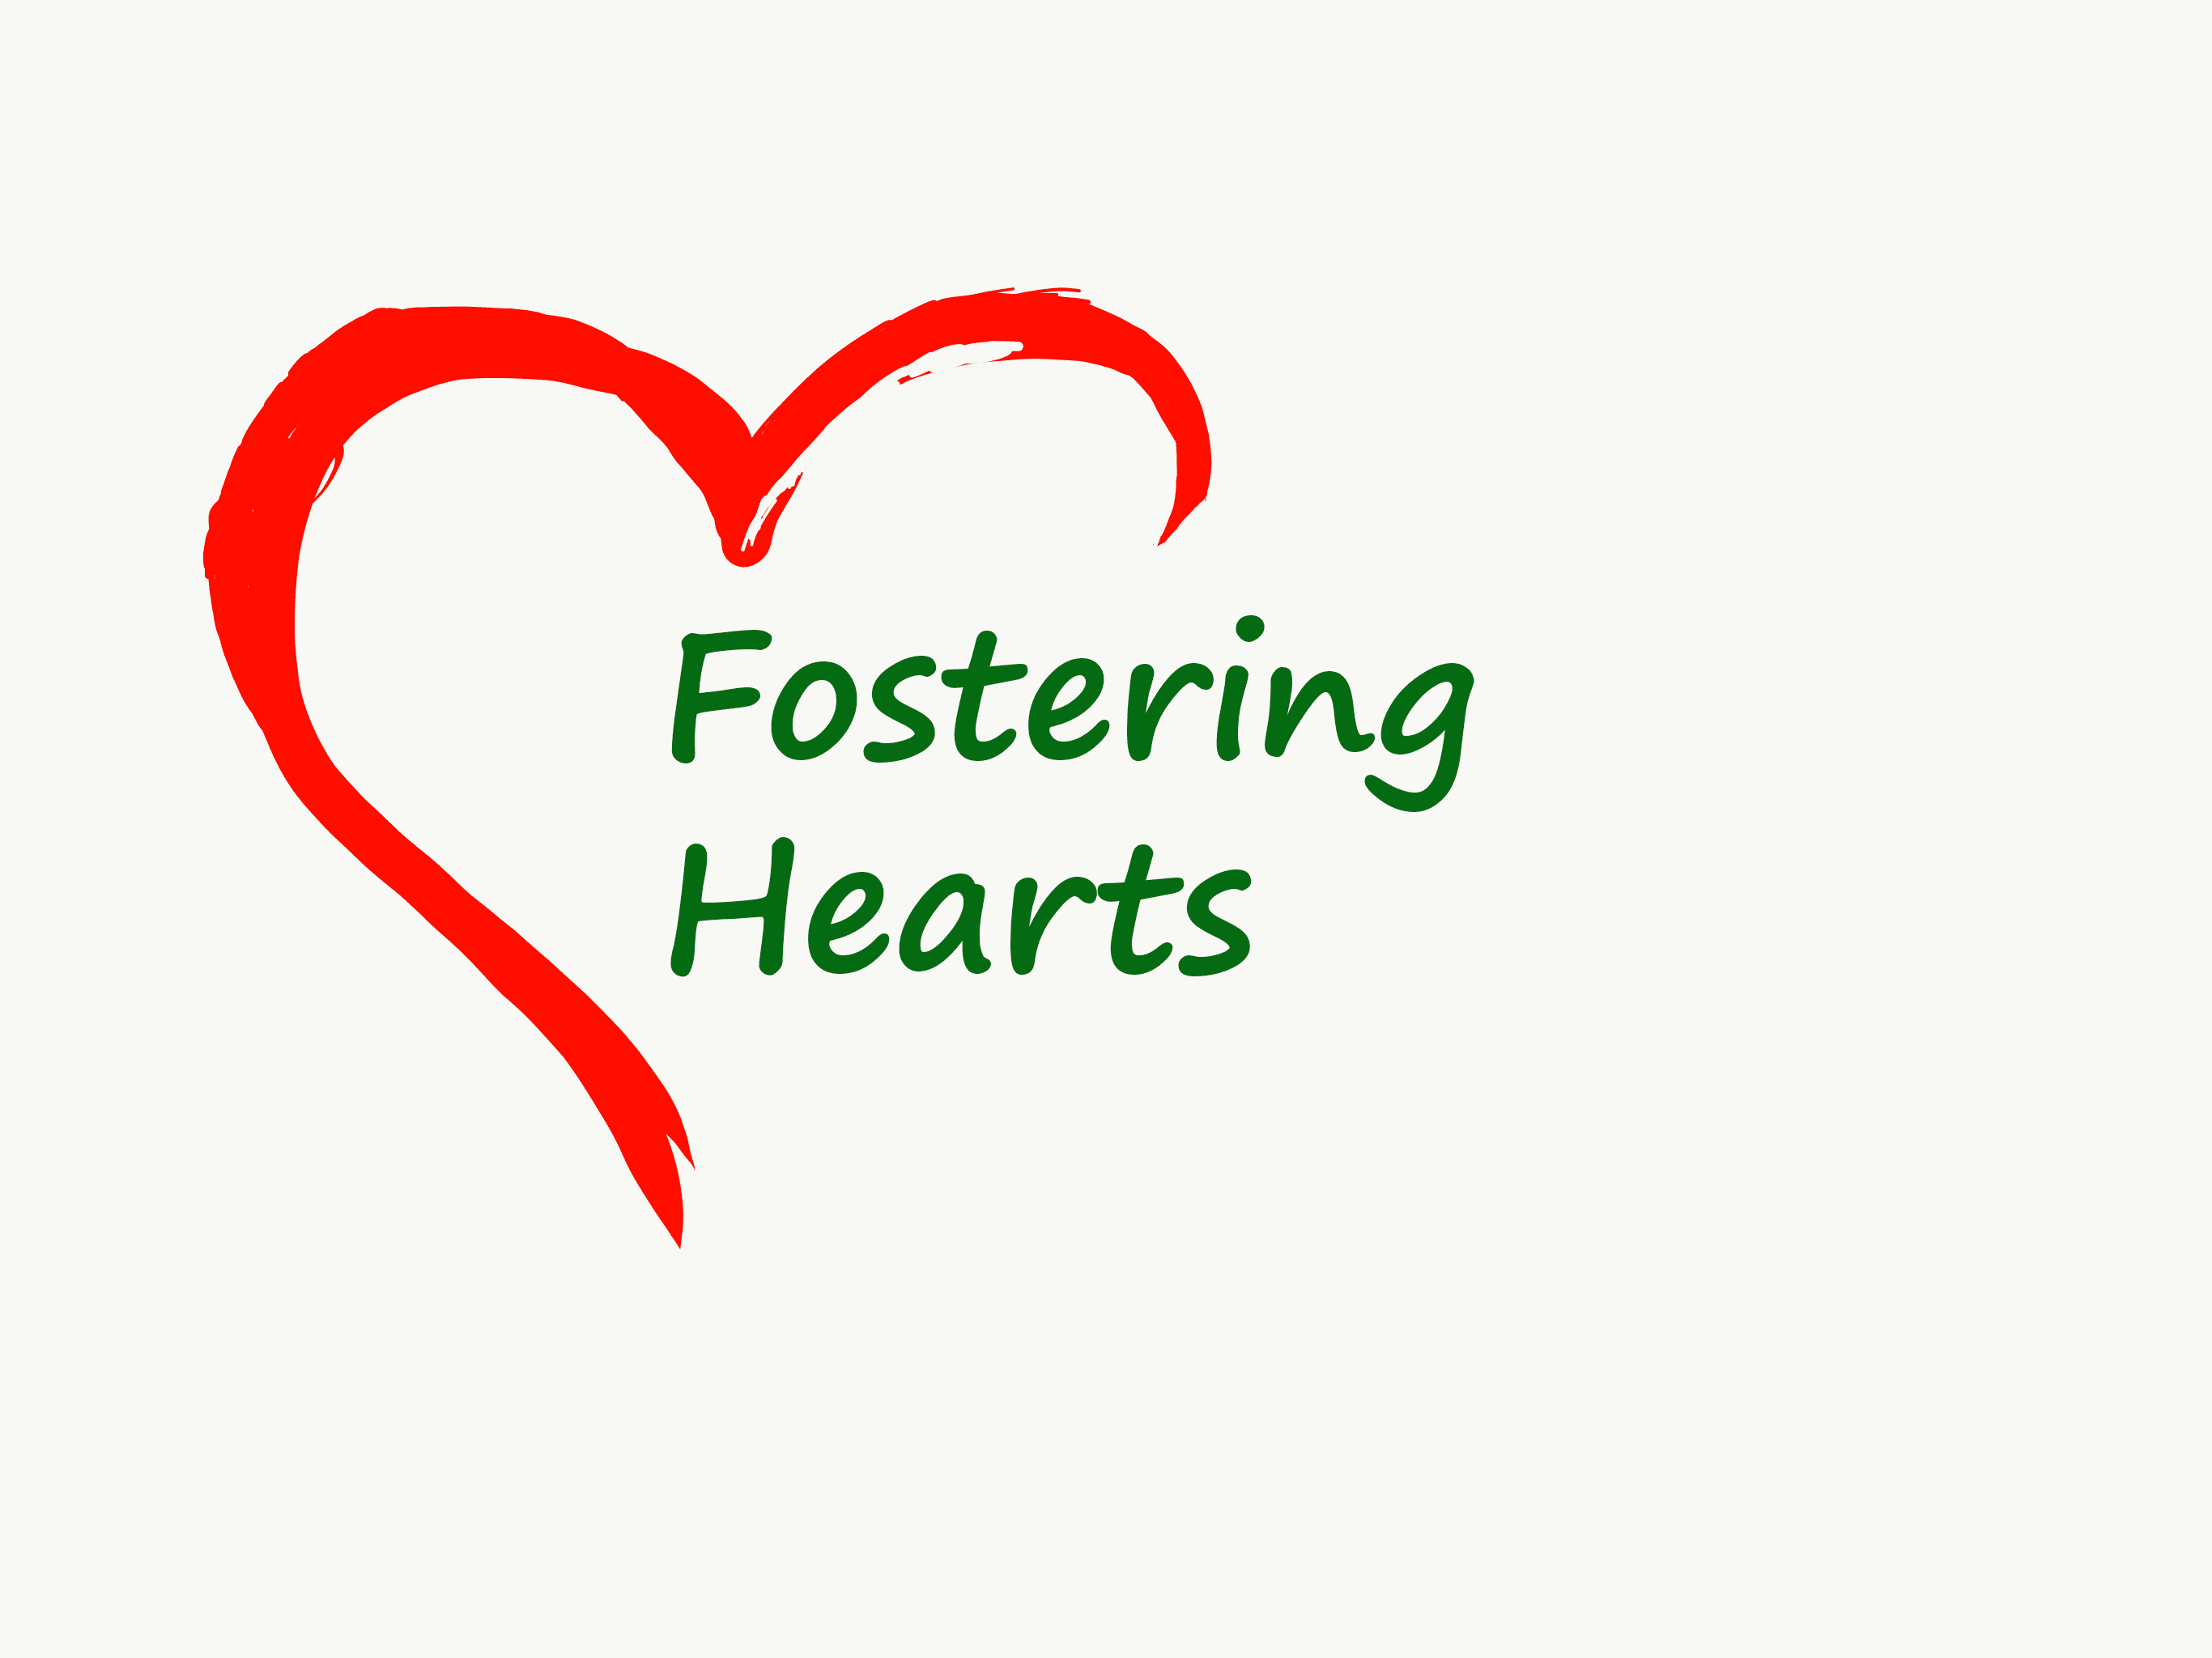 Become a foster carer with FH